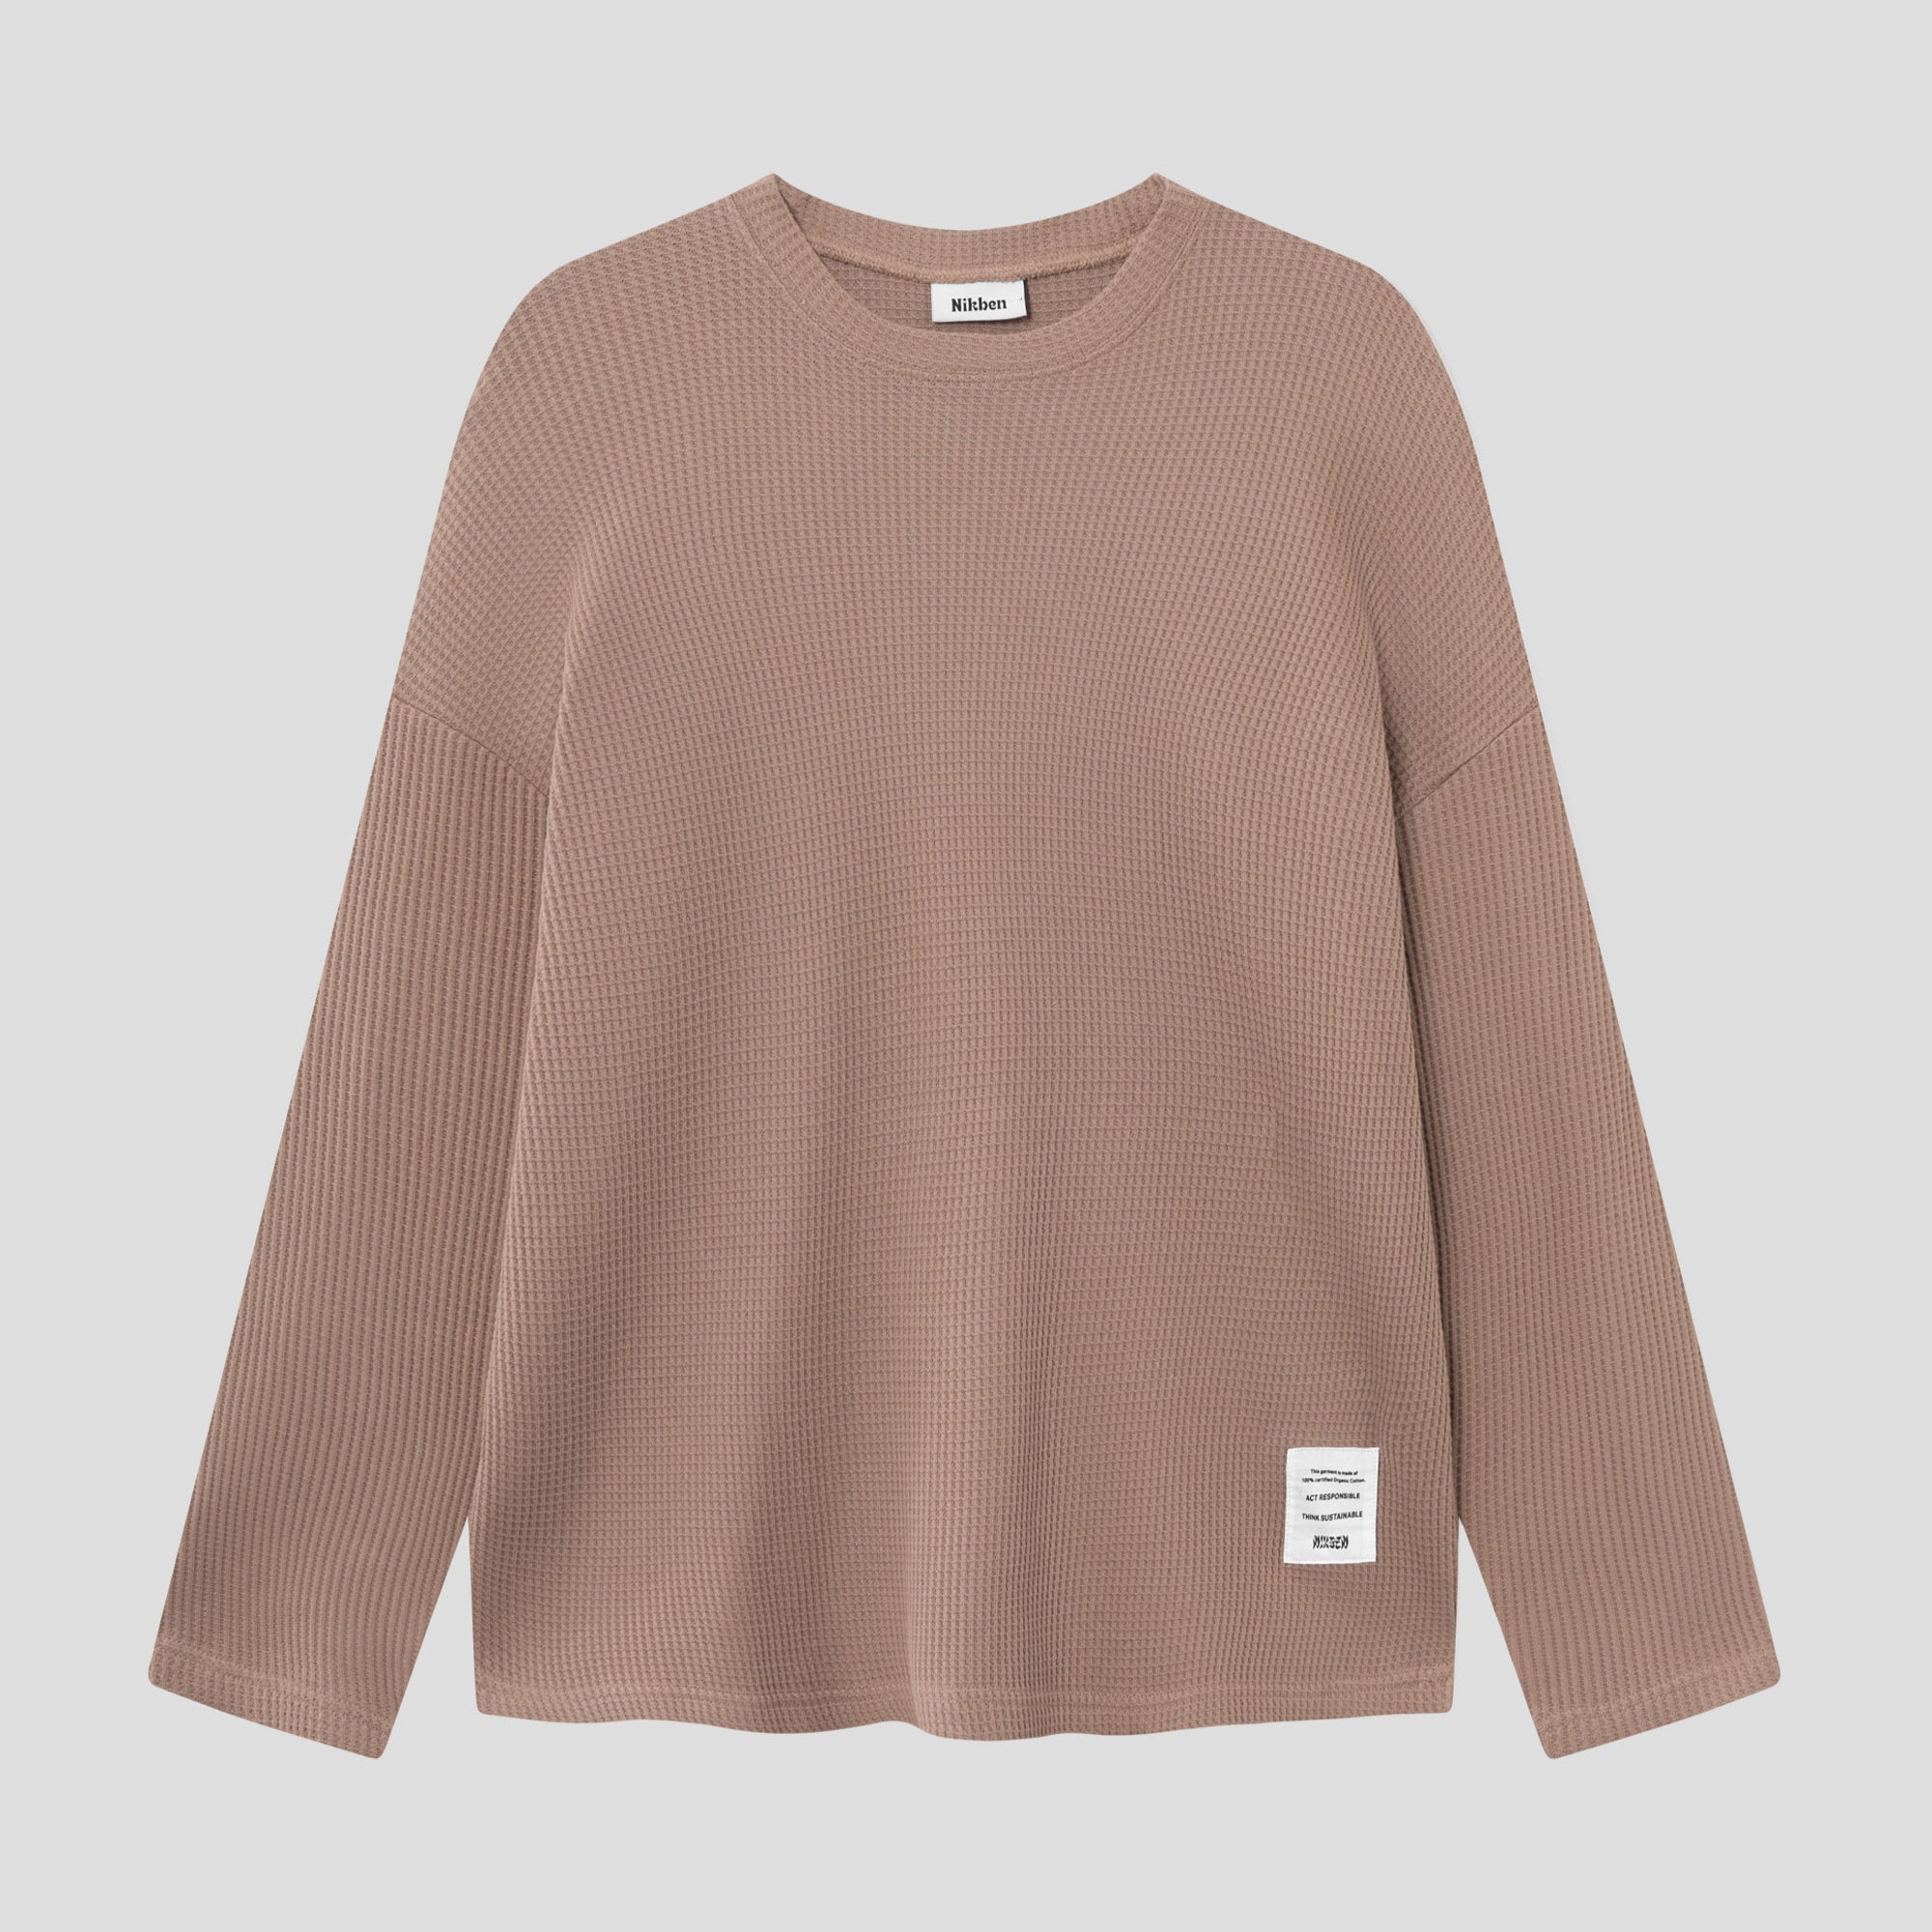 Brown waffle-patterned sweatshirt with a stitched-on material label.